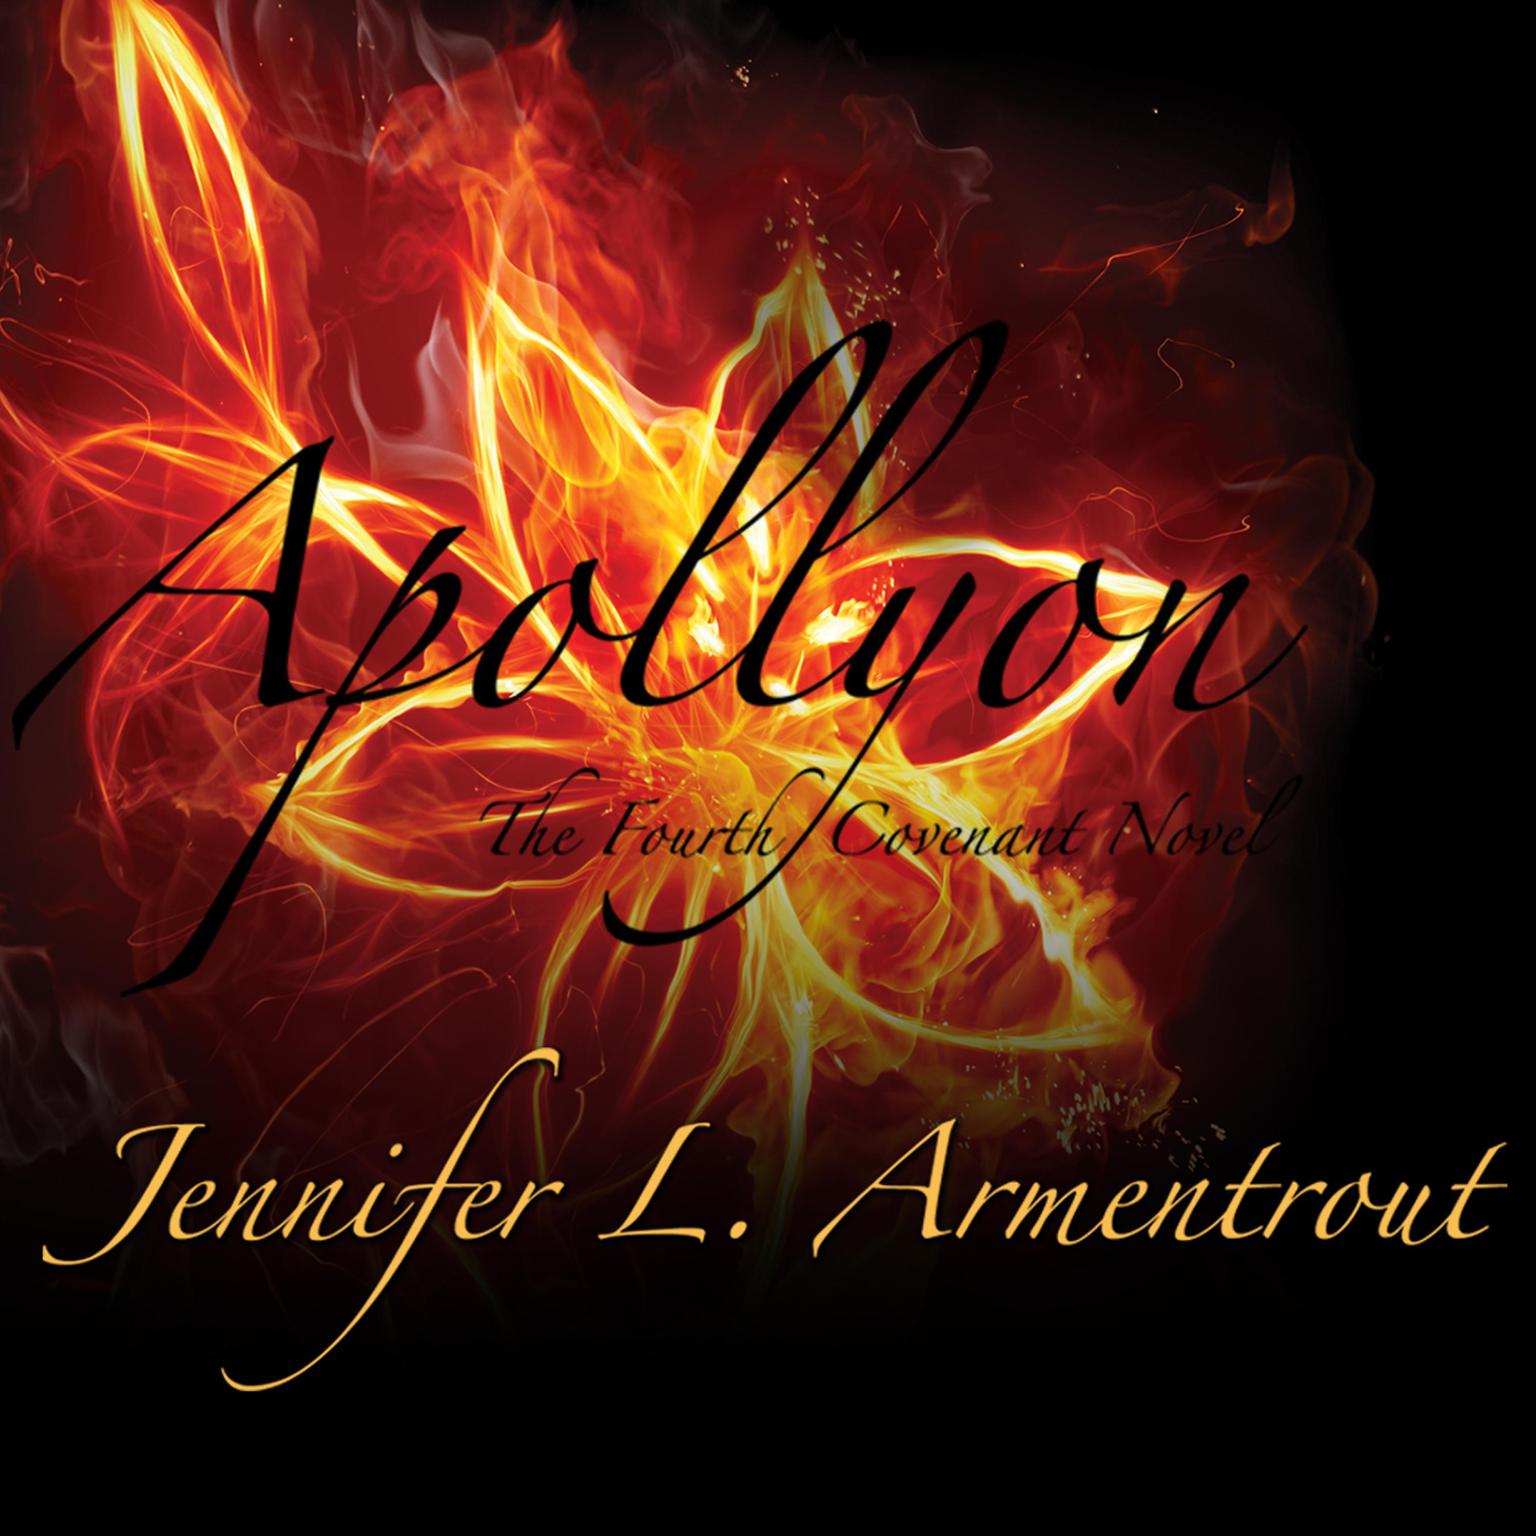 Apollyon: The Fourth Covenant Novel Audiobook, by Jennifer L. Armentrout